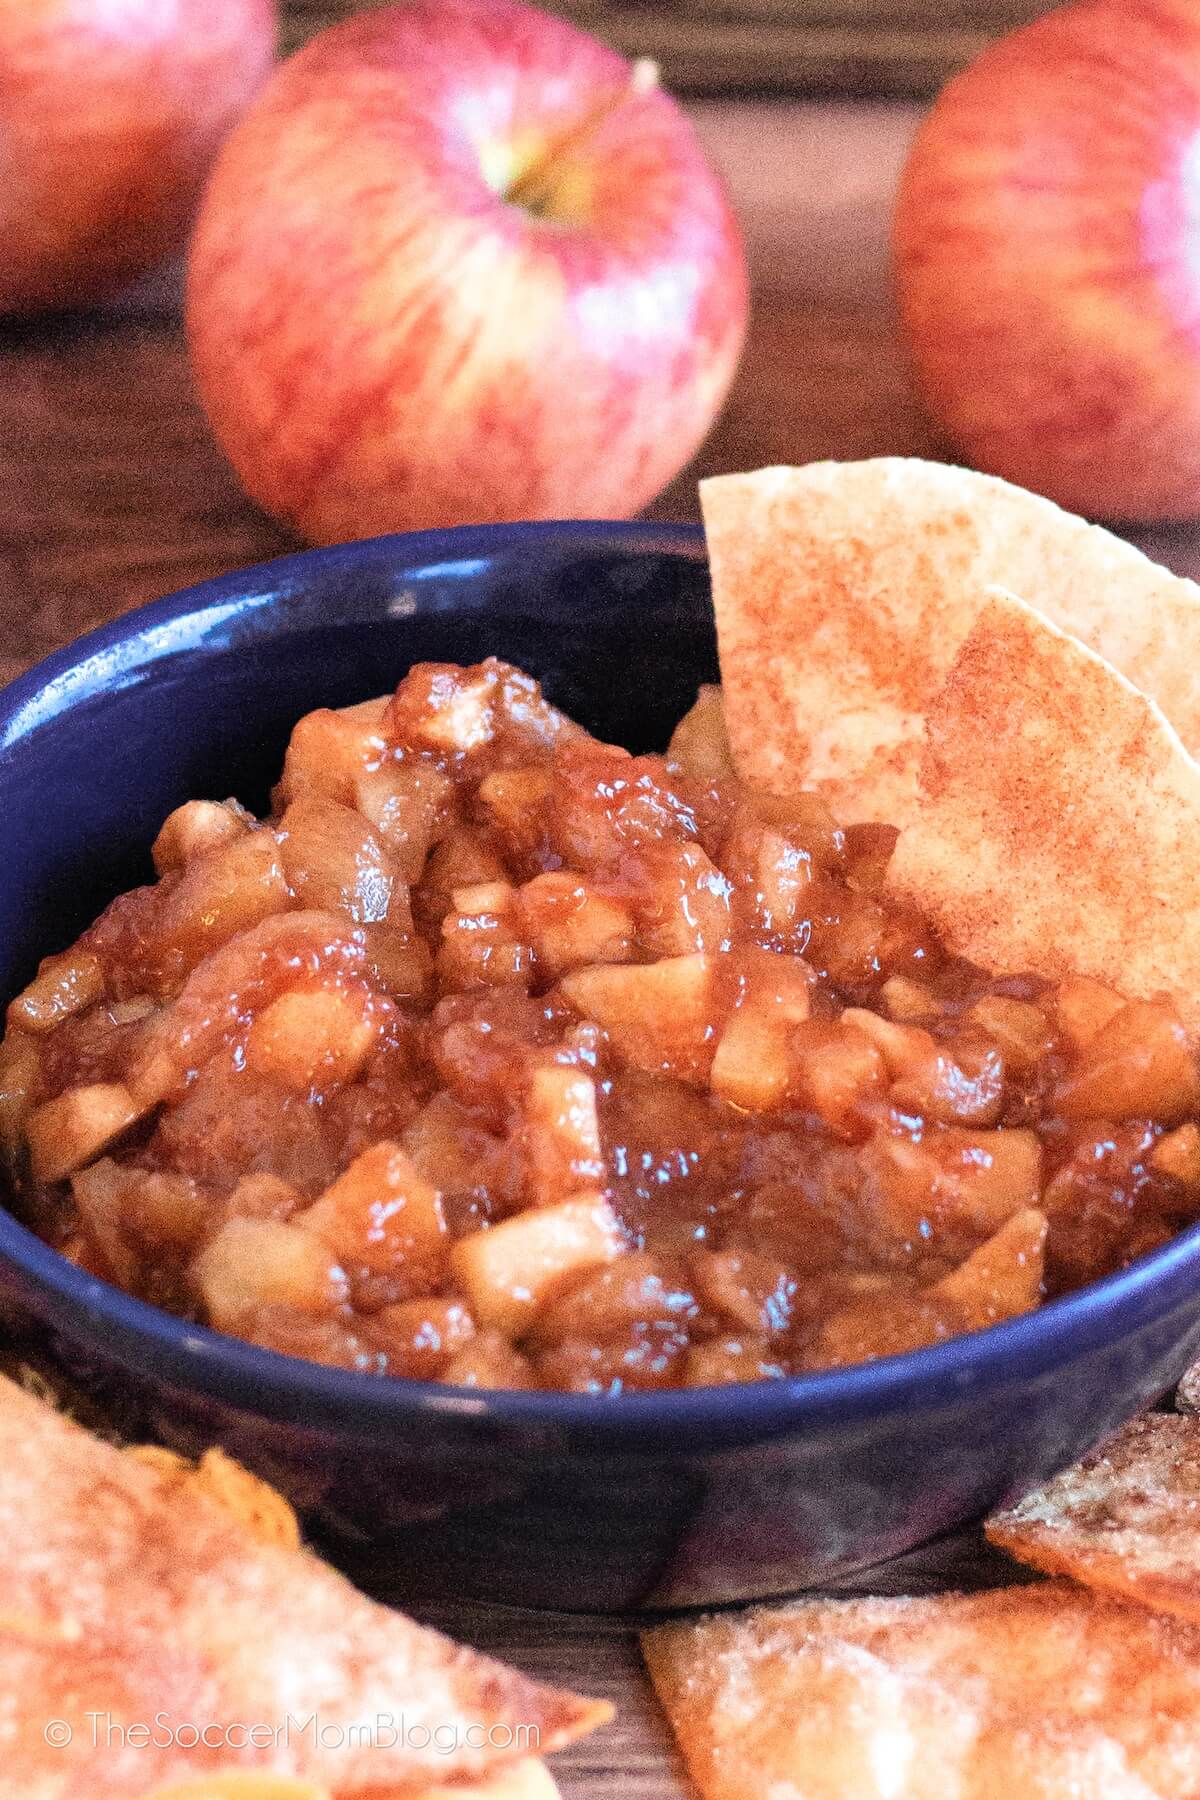 Apple Pie Dip in a ceramic bowl, with chips